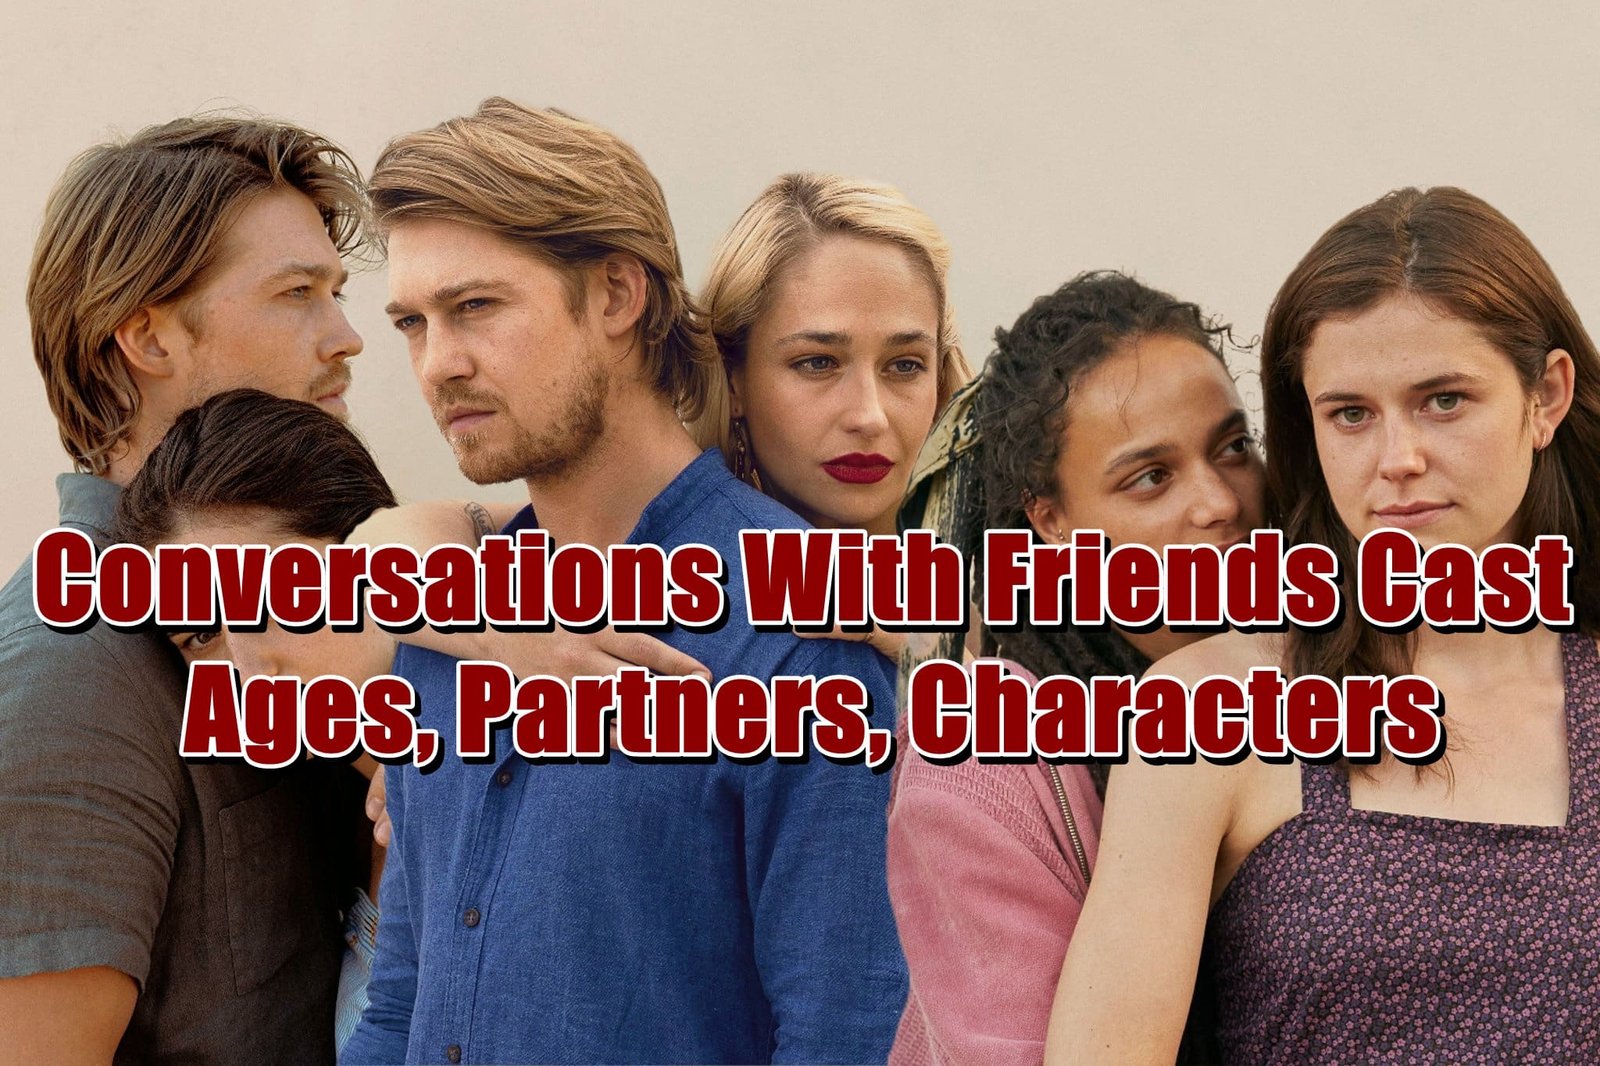 Conversations With Friends Cast - Ages, Partners, Characters